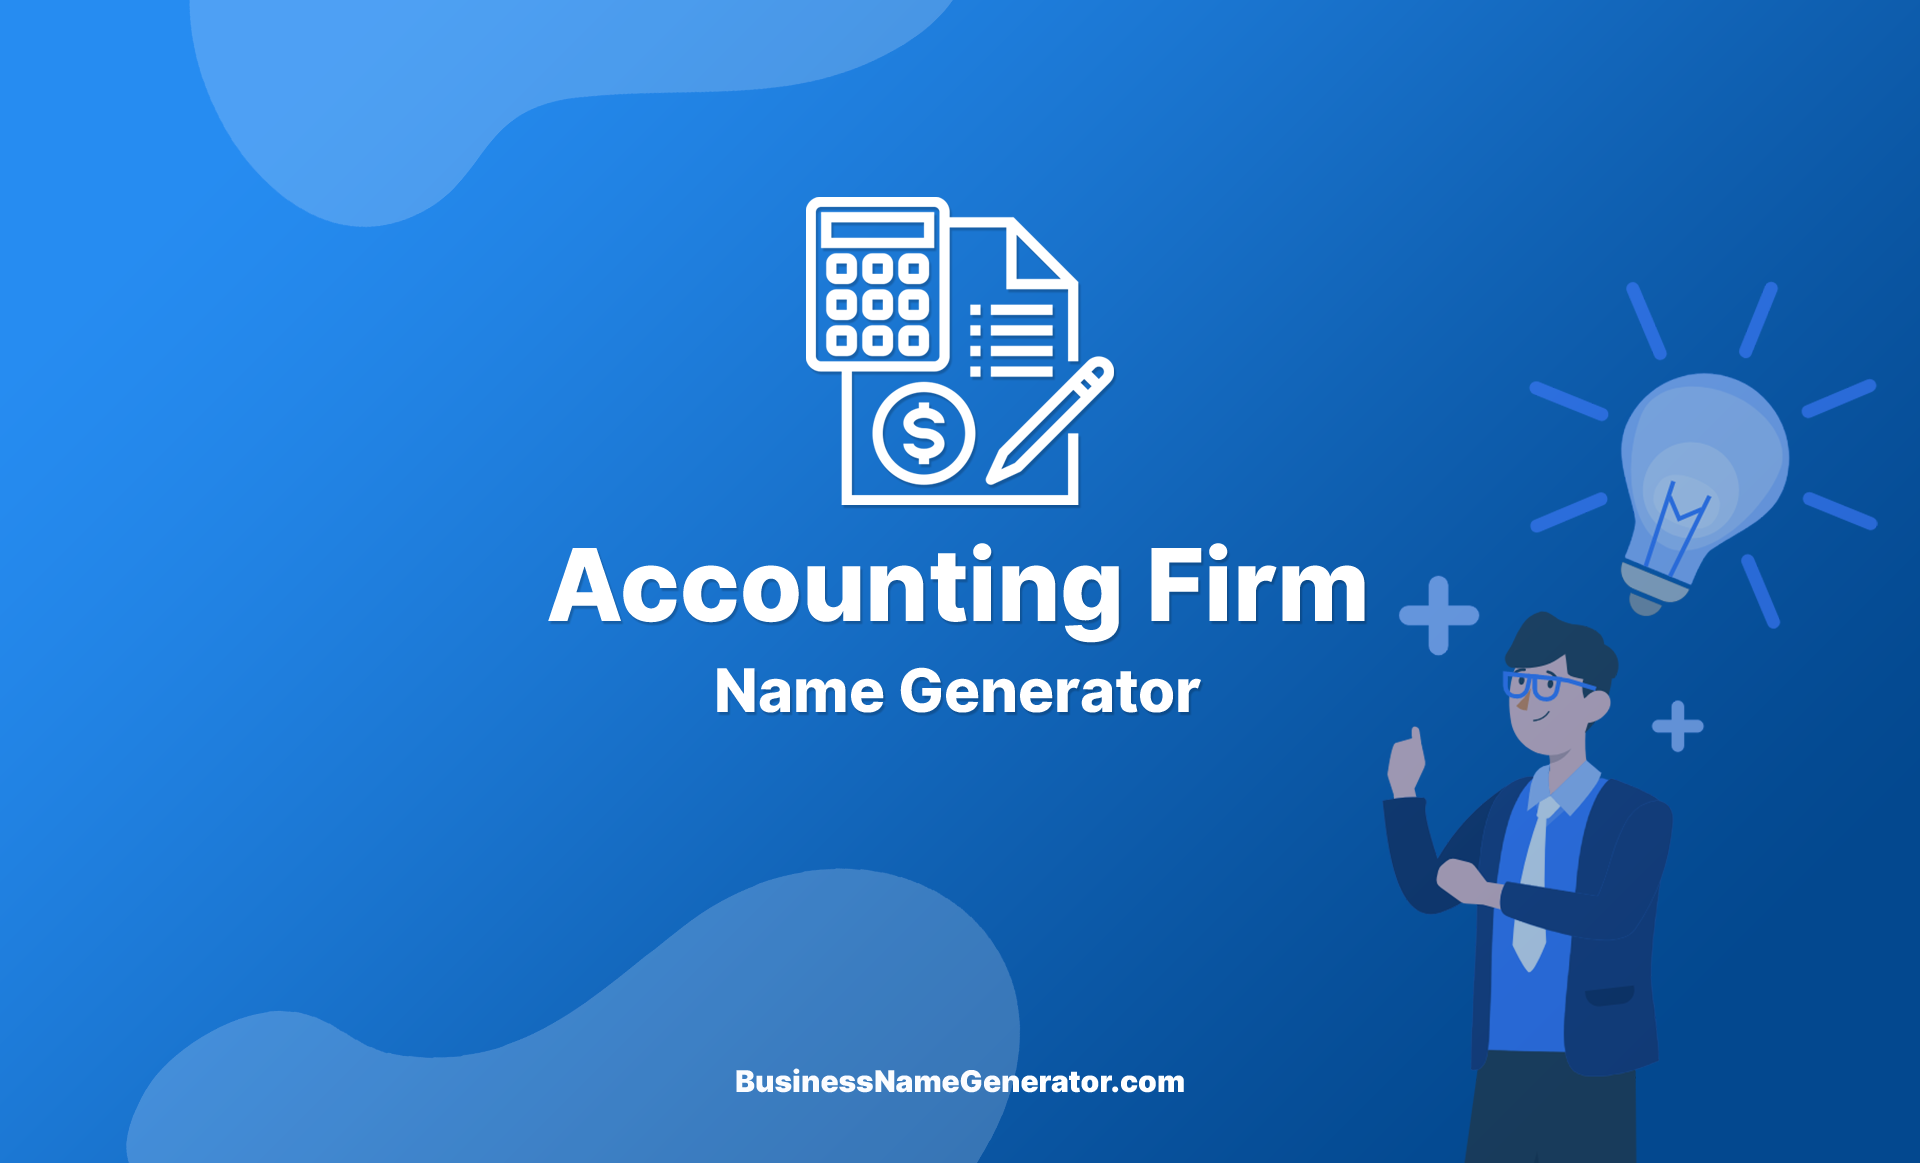 Accounting Firm Name Generator